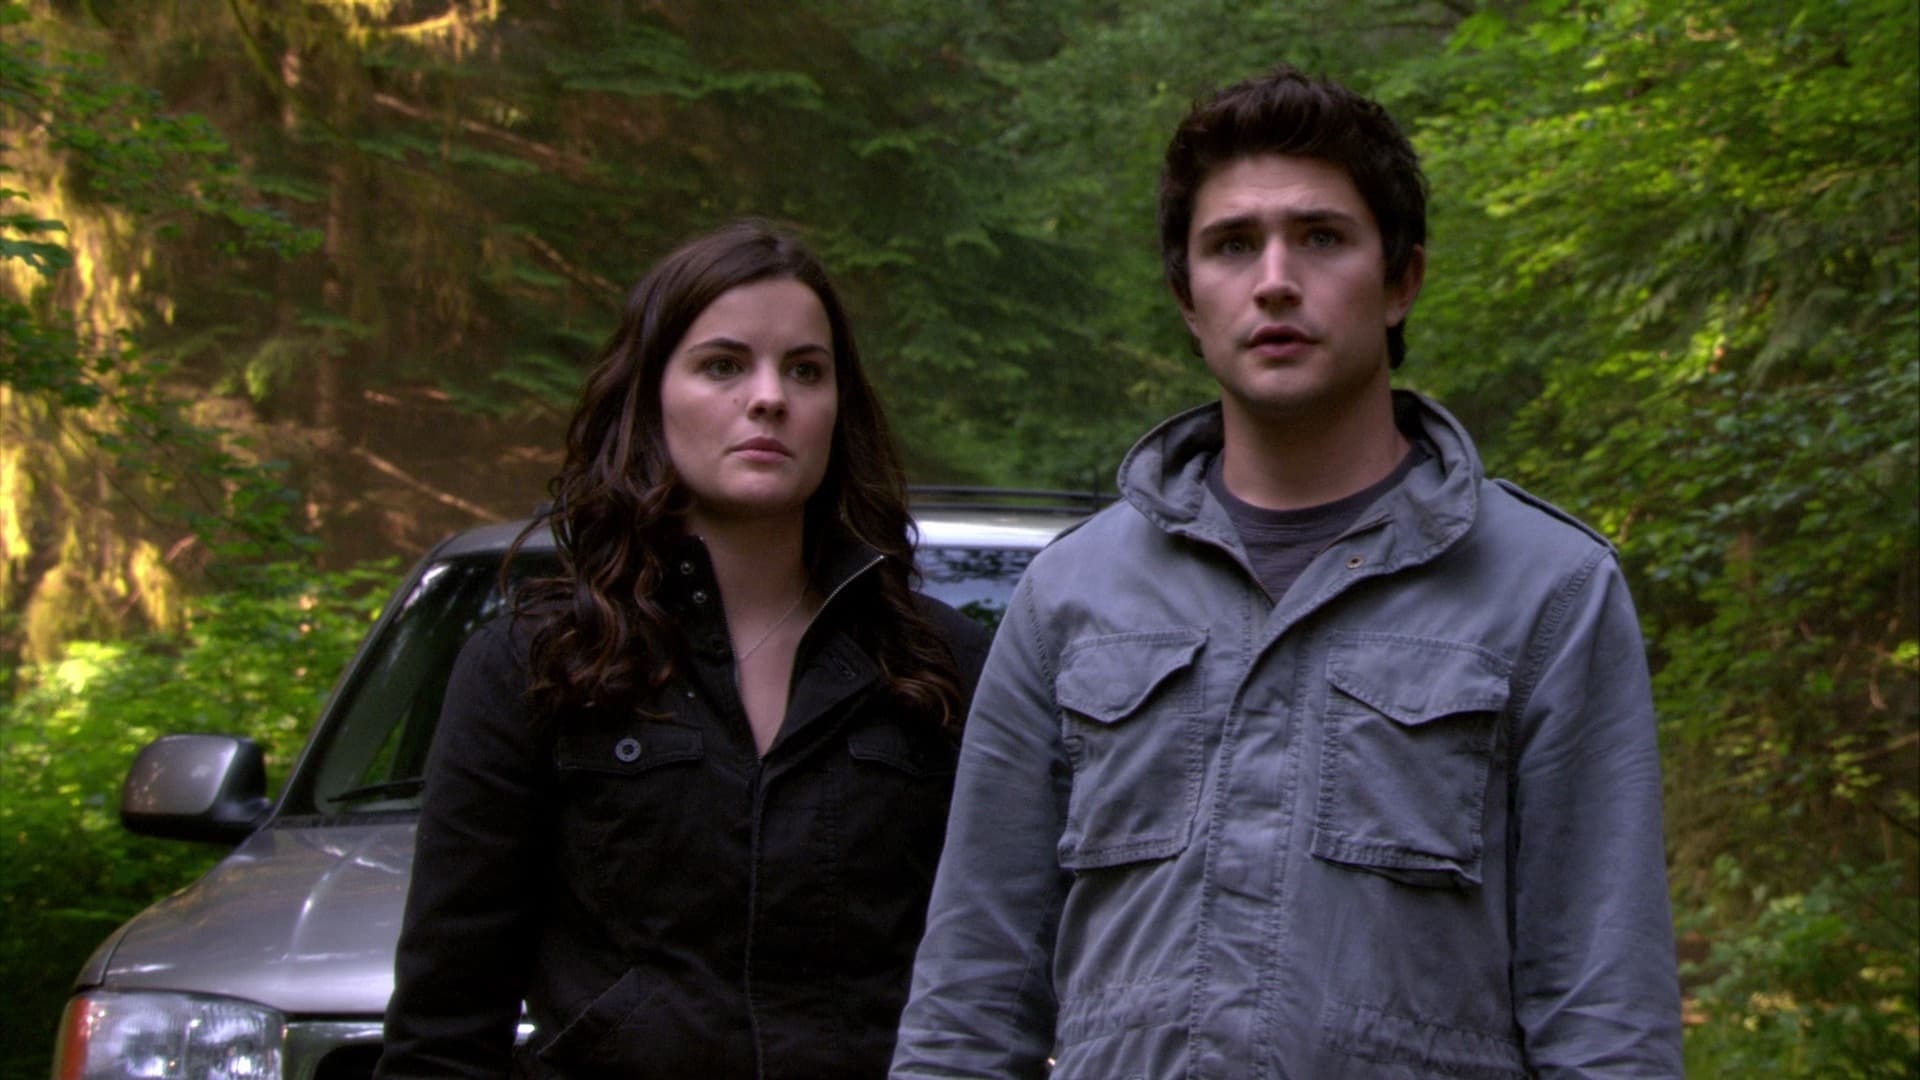 Kyle XY (TV Series): An American mystery drama TV series about a boy who wakes up in the forest outside of Seattle with no memory. 1920x1080 Full HD Wallpaper.